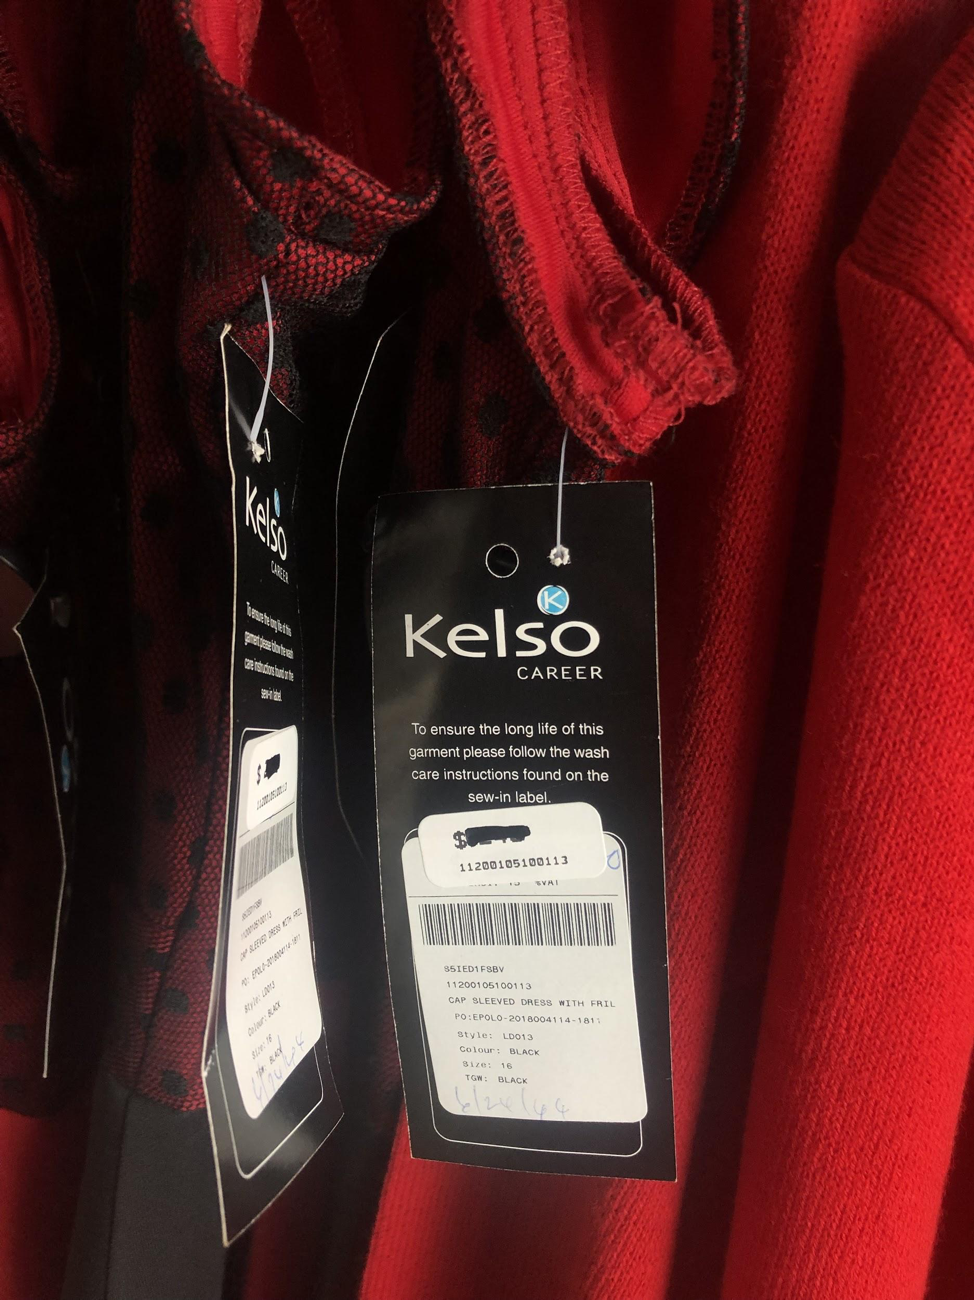 Prices crossed out on clothing items at Edgars bra